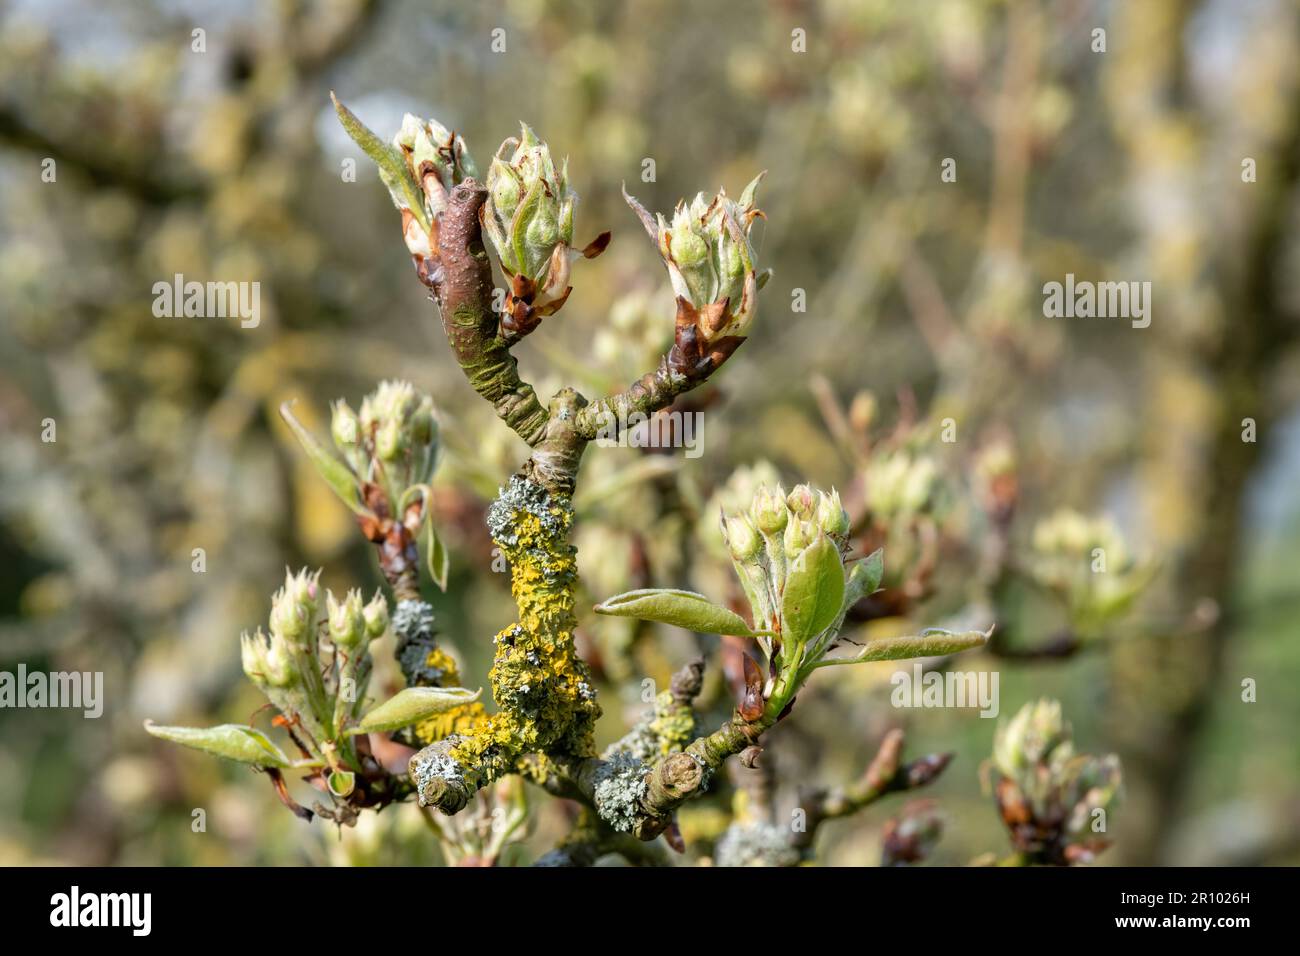 Close up of fruit buds at the green cluster growth stage on a conference pear tree Stock Photo